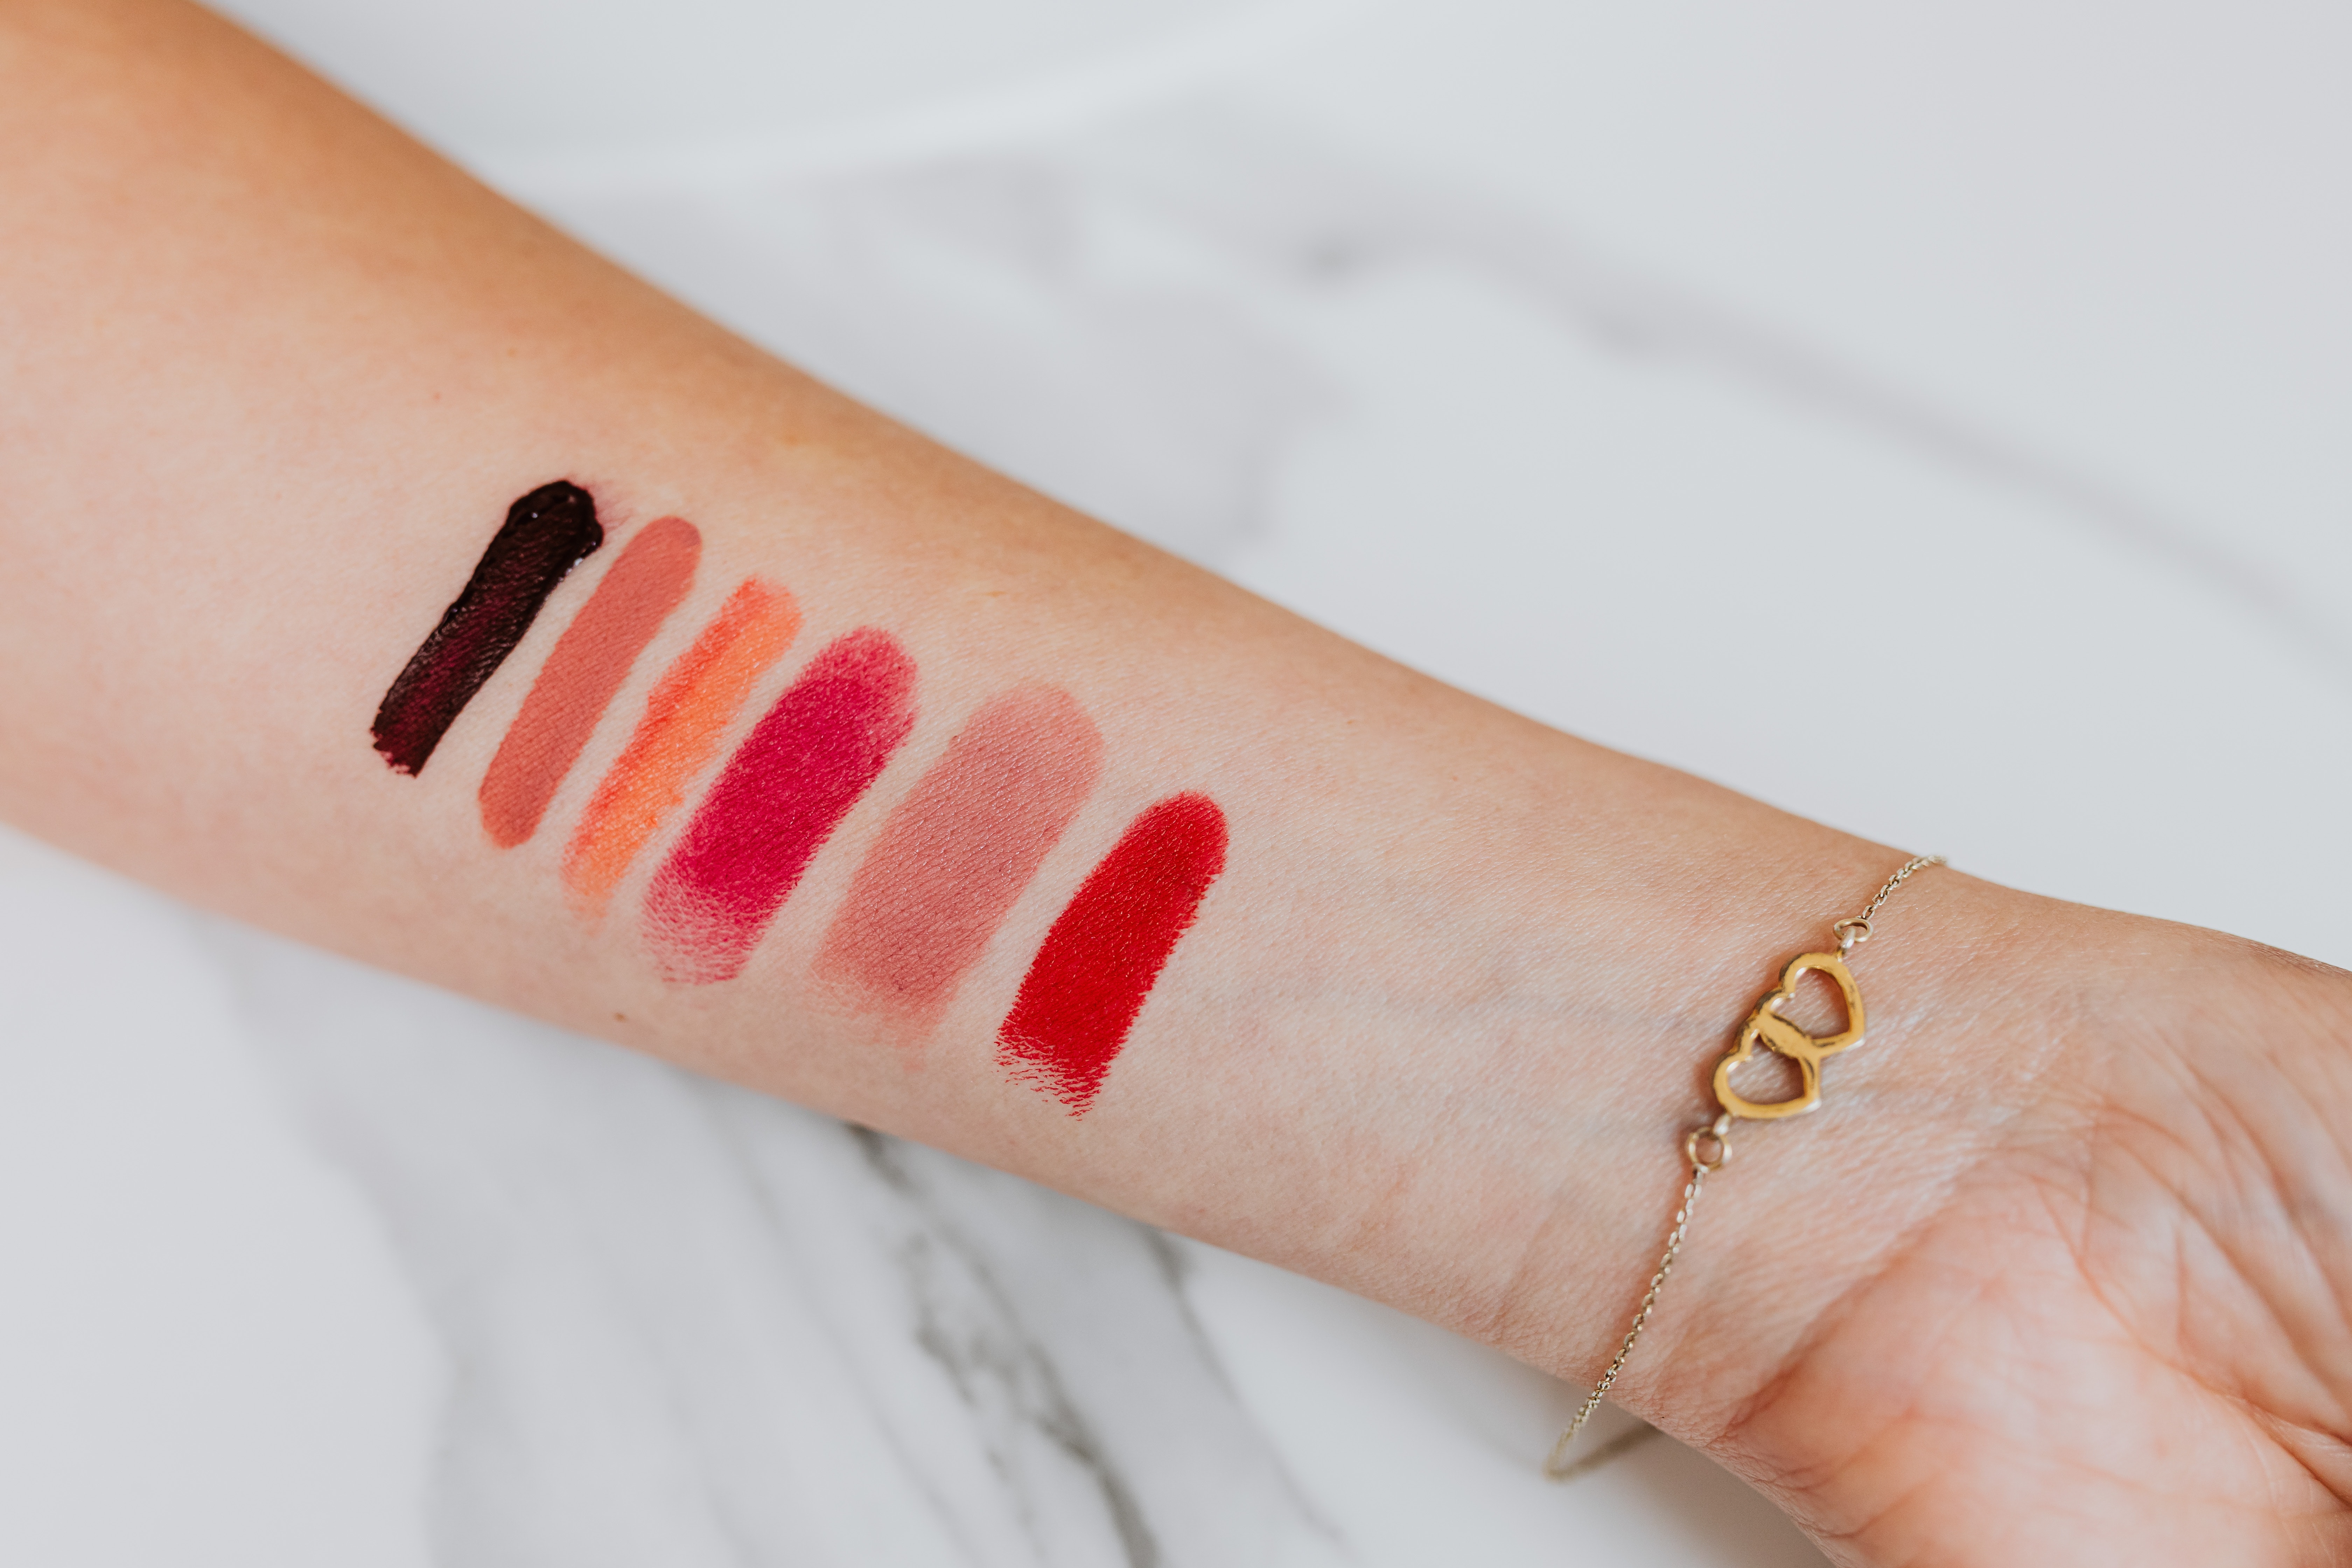 Different lipstick shades on a woman's arm. │Source: Pexels